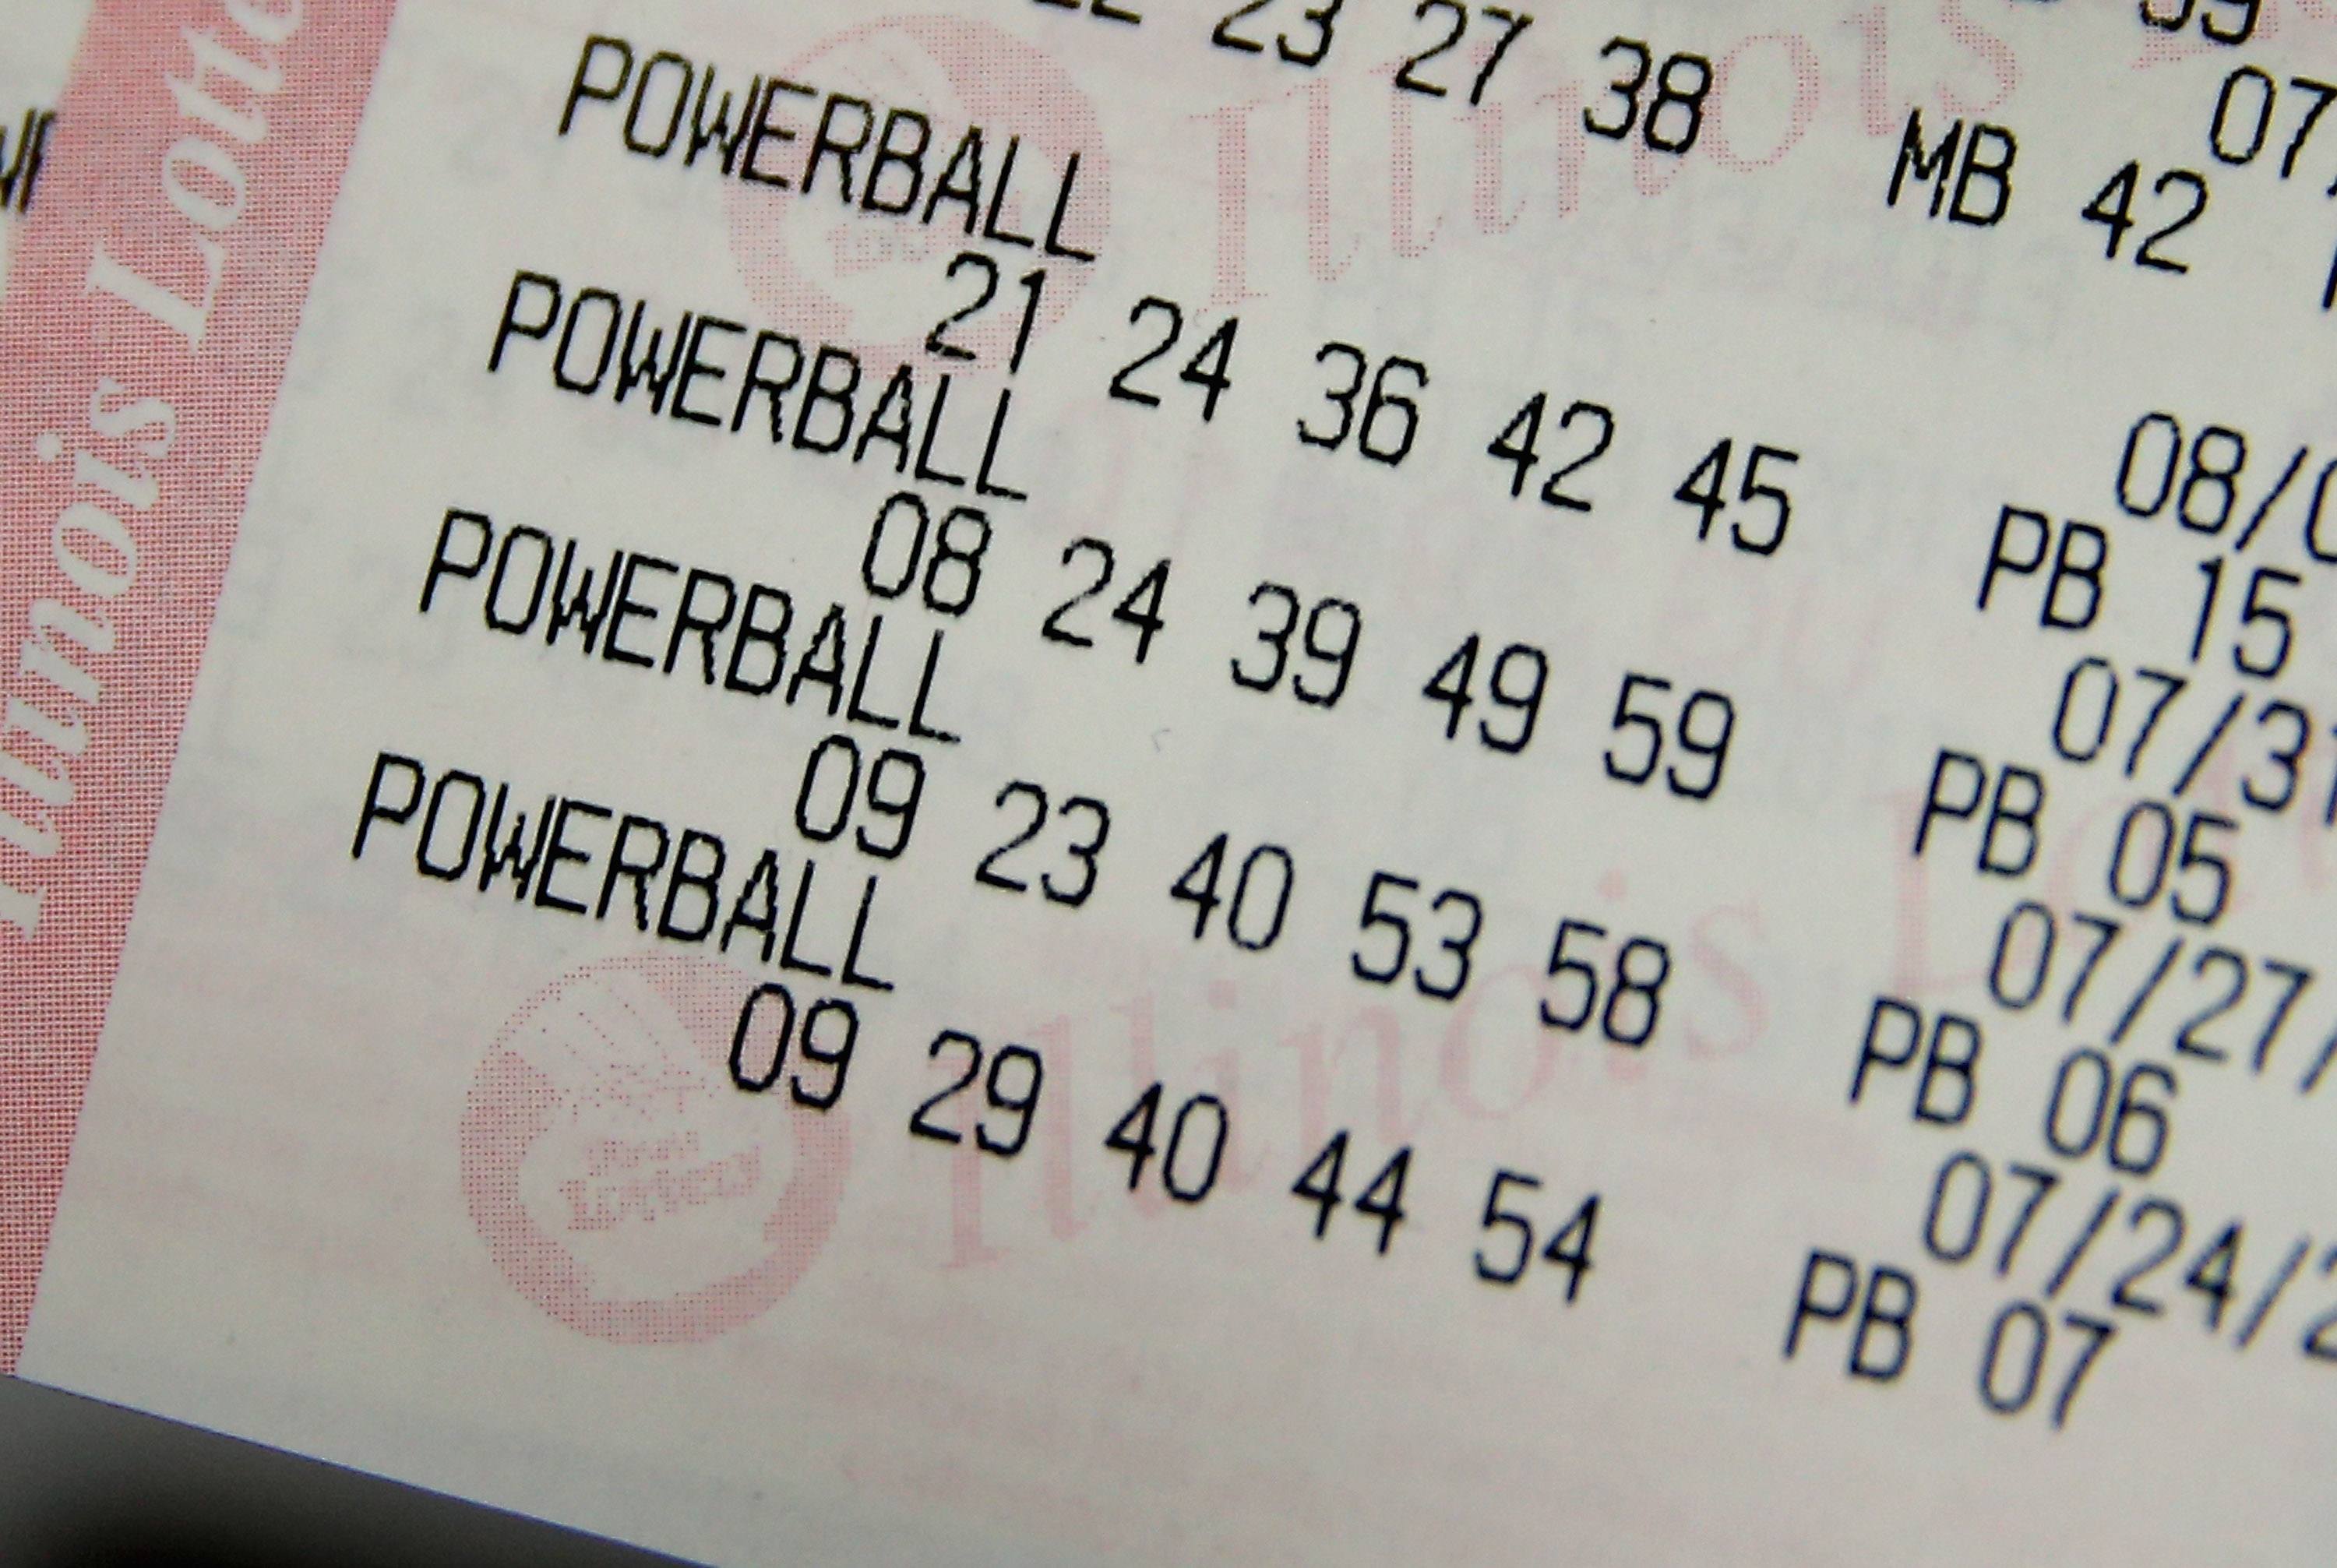 Best Lottery Numbers